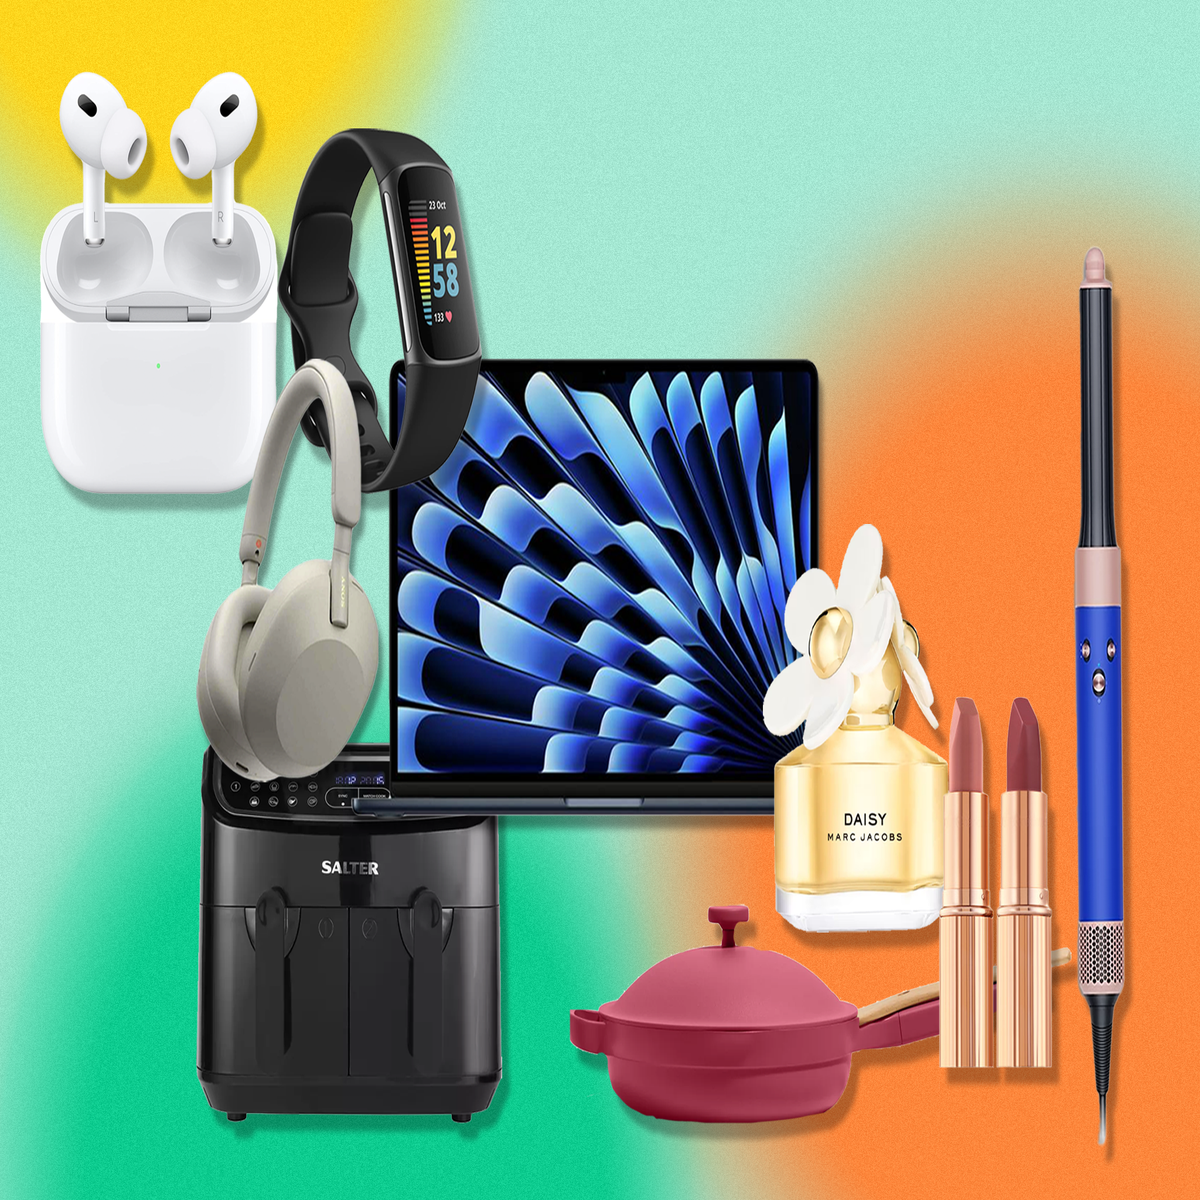 Back to School Sales for 2023 Are Live! Here Are the Top Deals